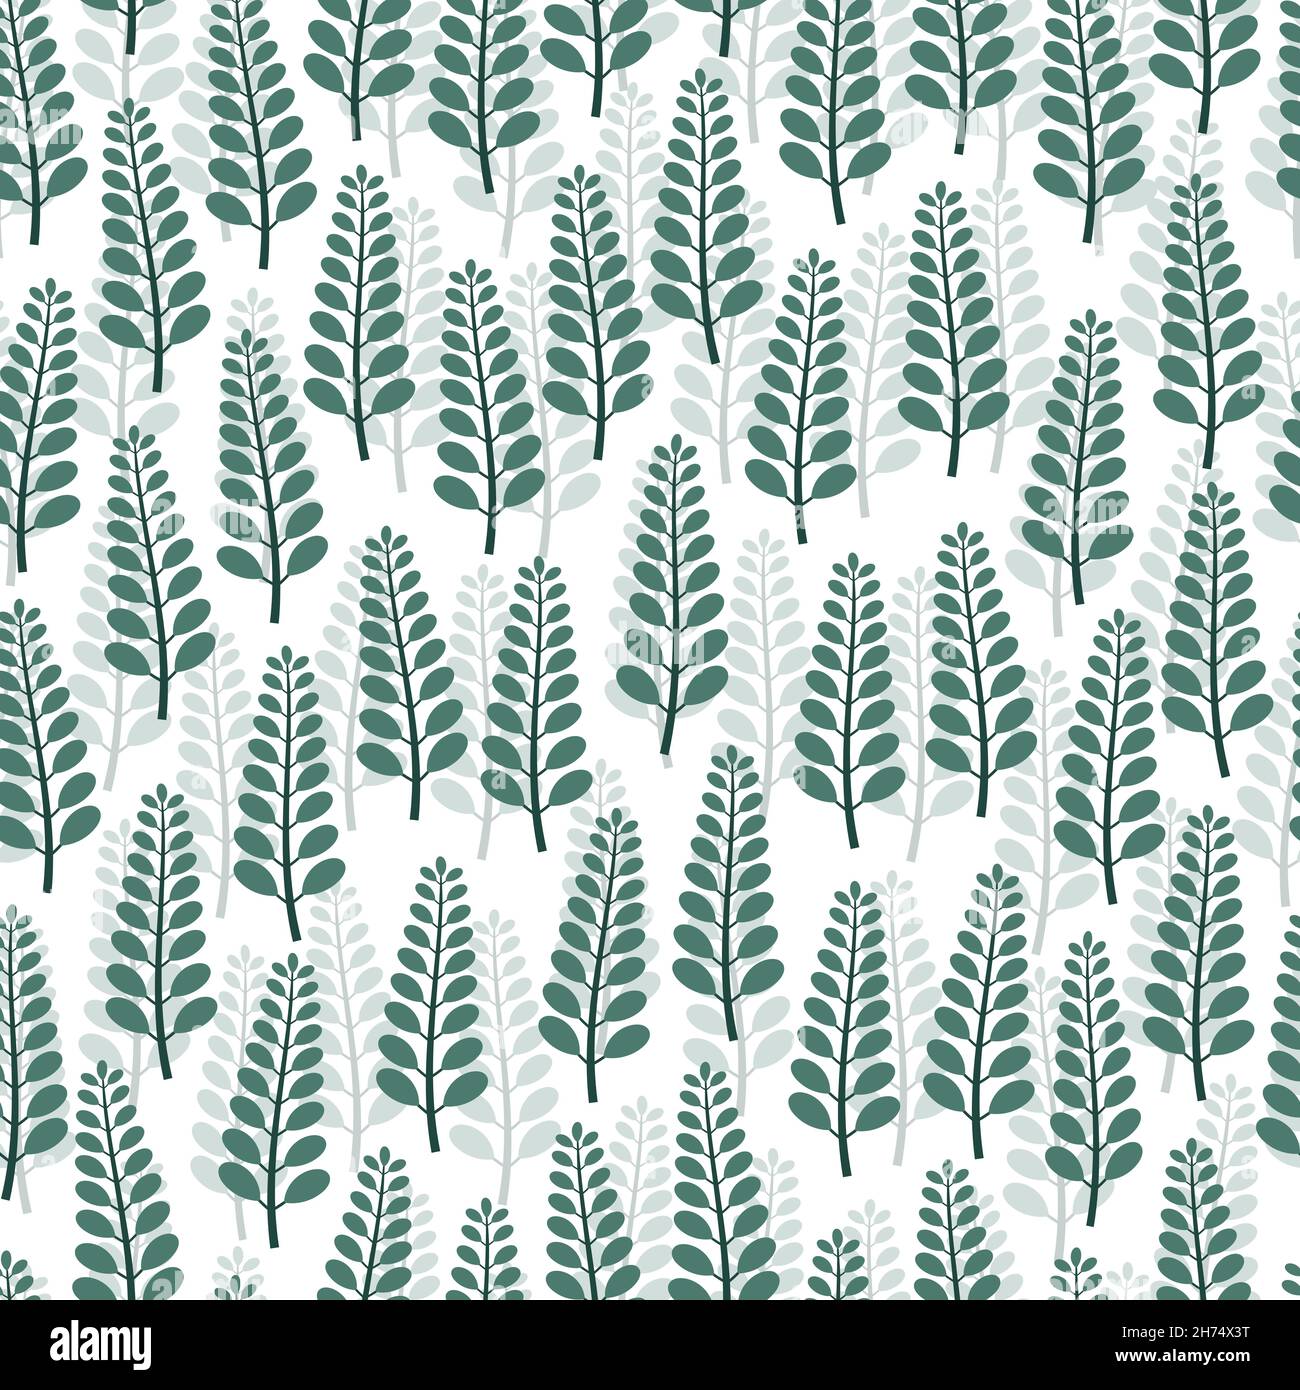 Vintage trendy vector seamless ditsy pattern of plants and leaves. All over design artistic foliage repeat texture background for printing and textile Stock Vector